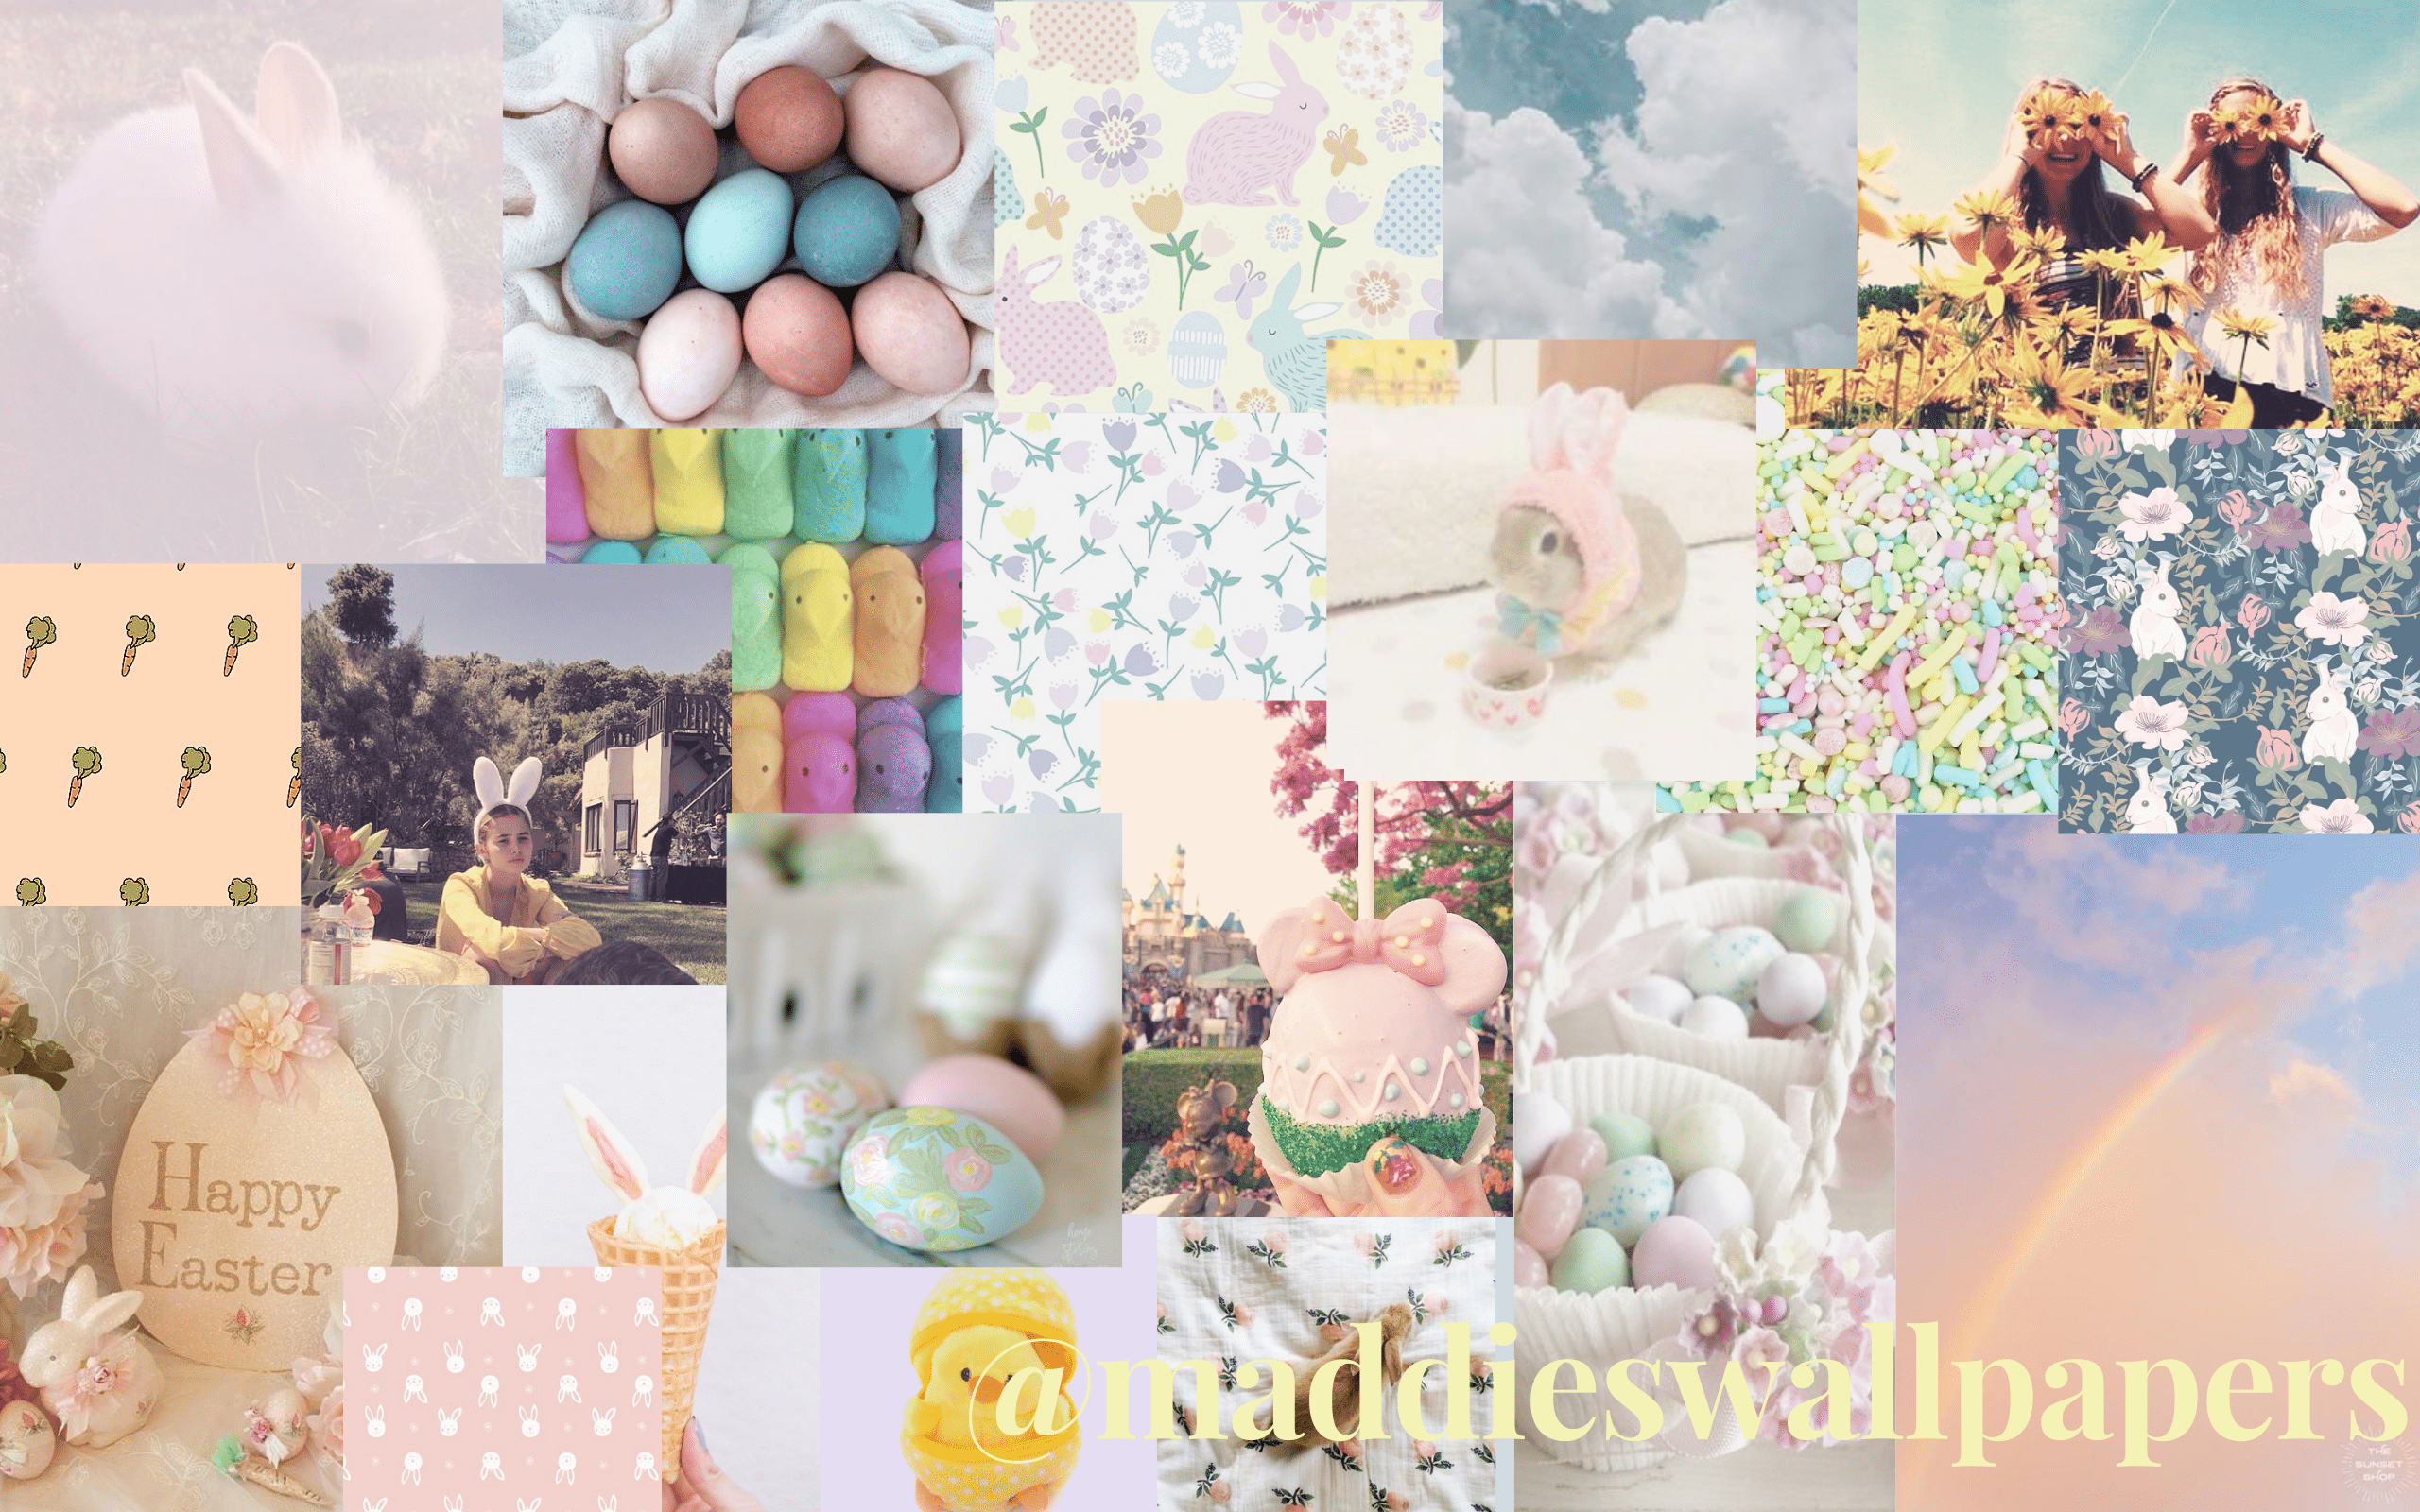 eASTER wallpaper by Maddies's wallpaper. Easter wallpaper, Happy easter, Free wallpaper